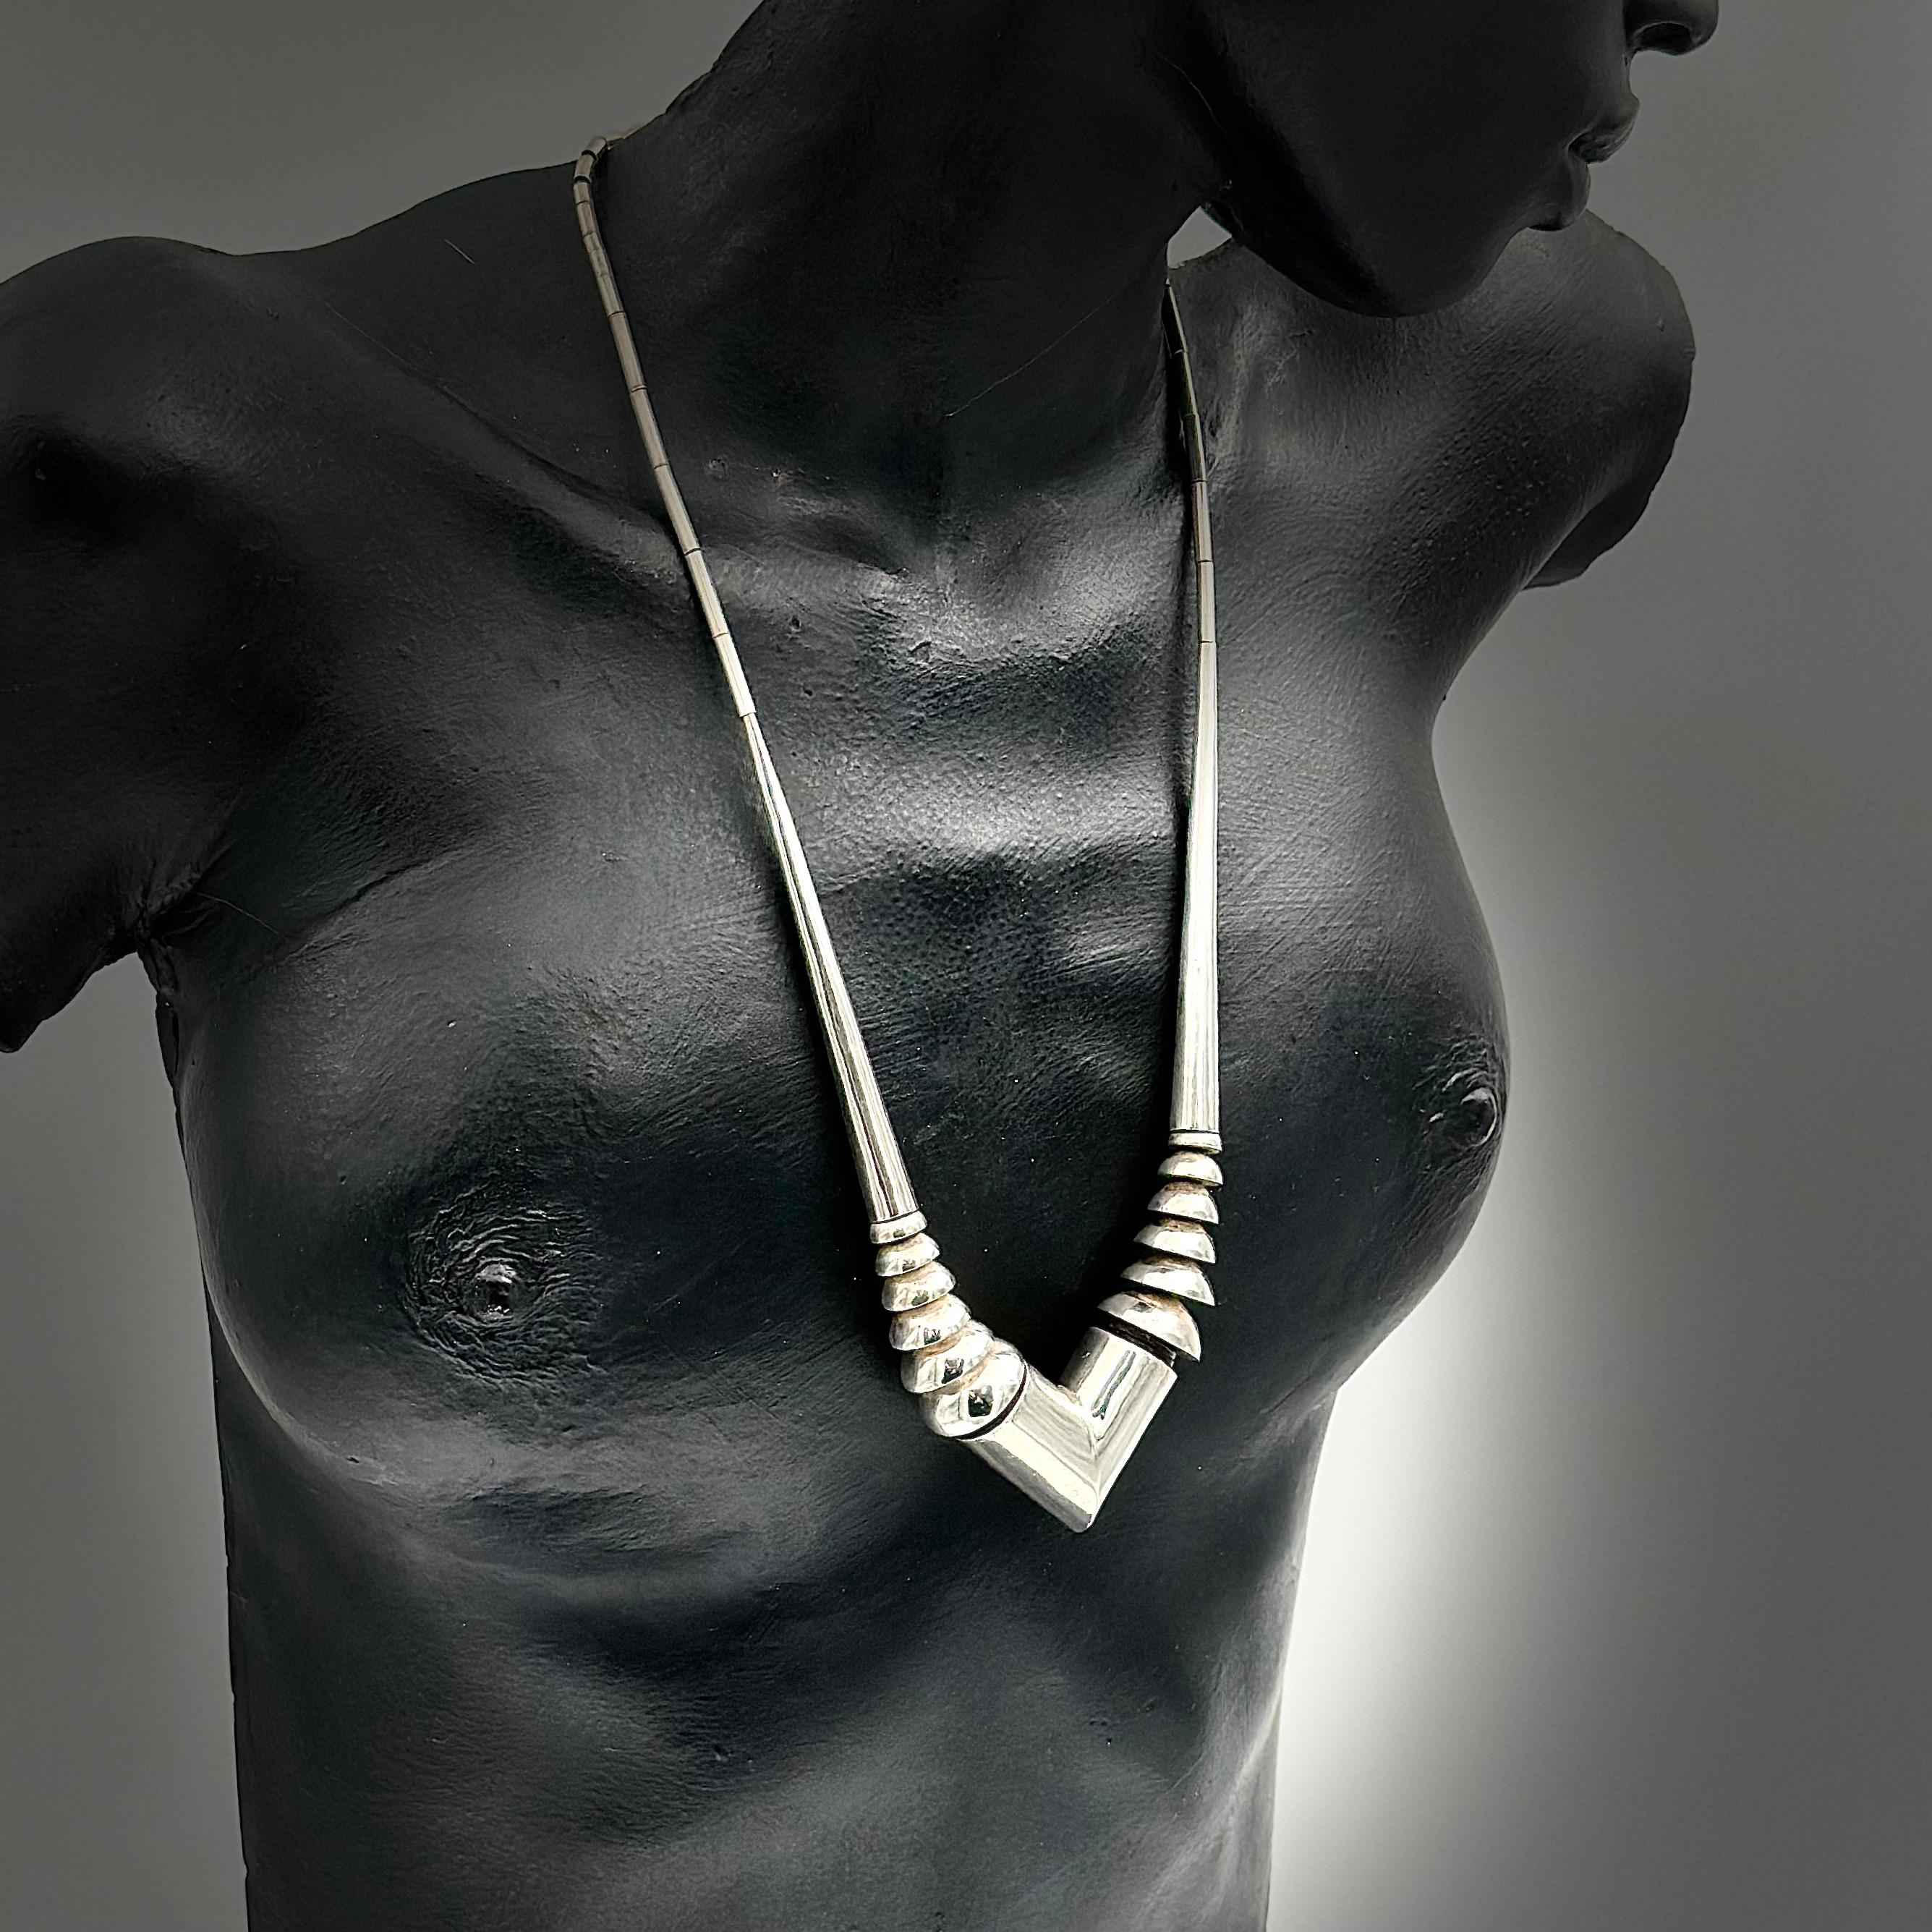 Created as a one of a kind necklace in the late 1970's, this is part of the Nautilus series that Robert Lee Morris designed and made by hand in Soho NYC. Using two elongated hollow tapered tubes as the body, and a graduating series of half domes